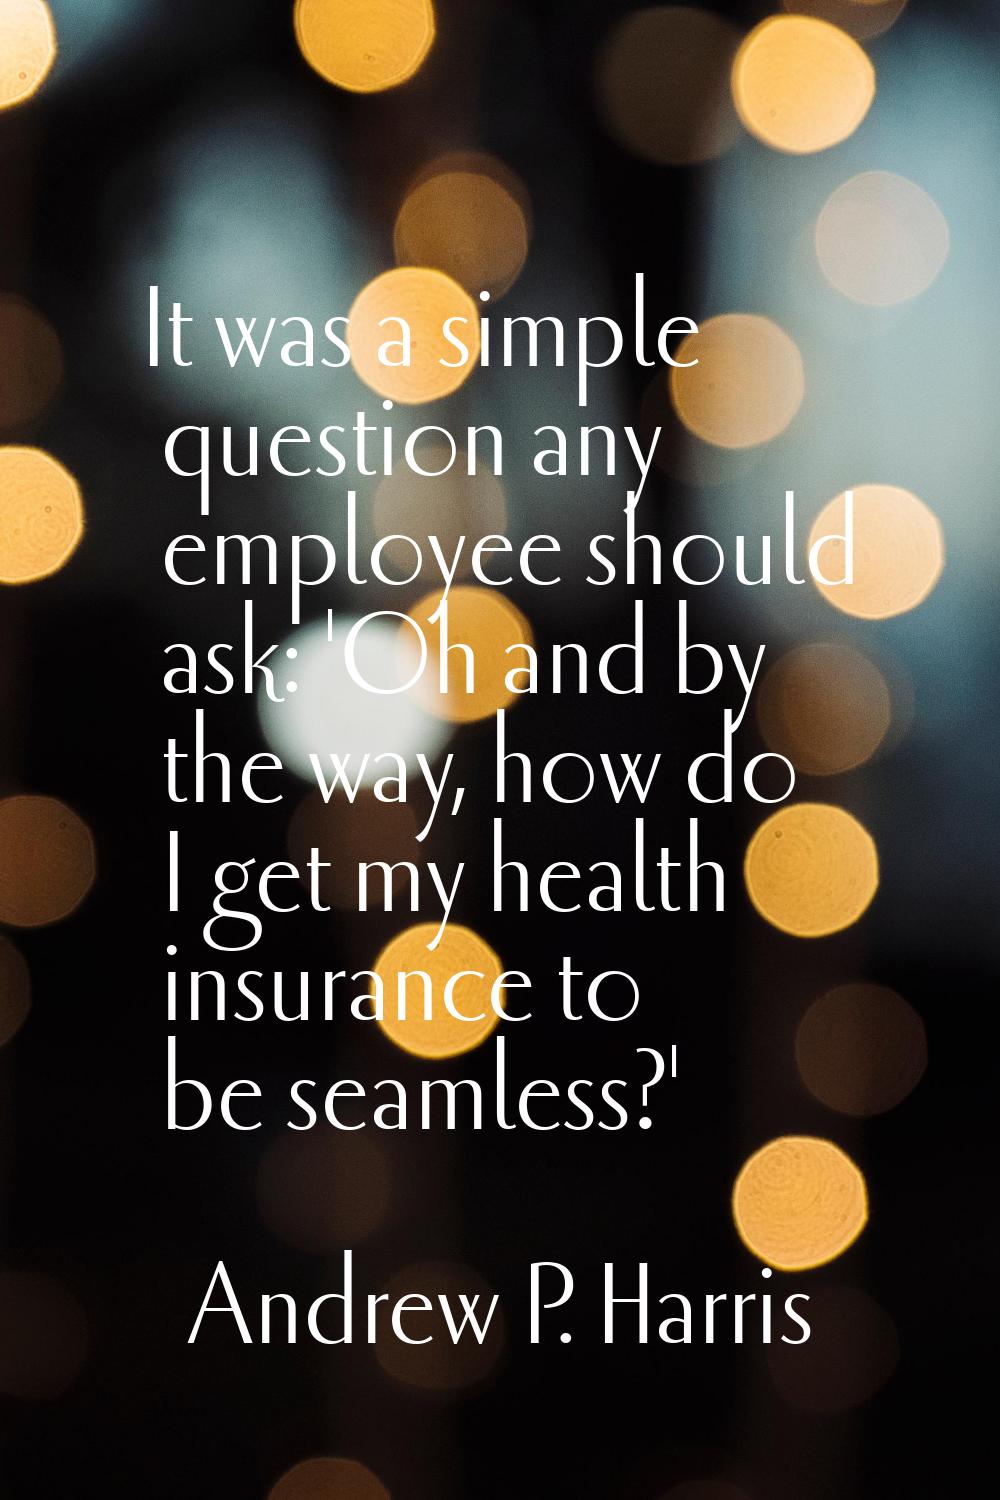 It was a simple question any employee should ask: 'Oh and by the way, how do I get my health insura